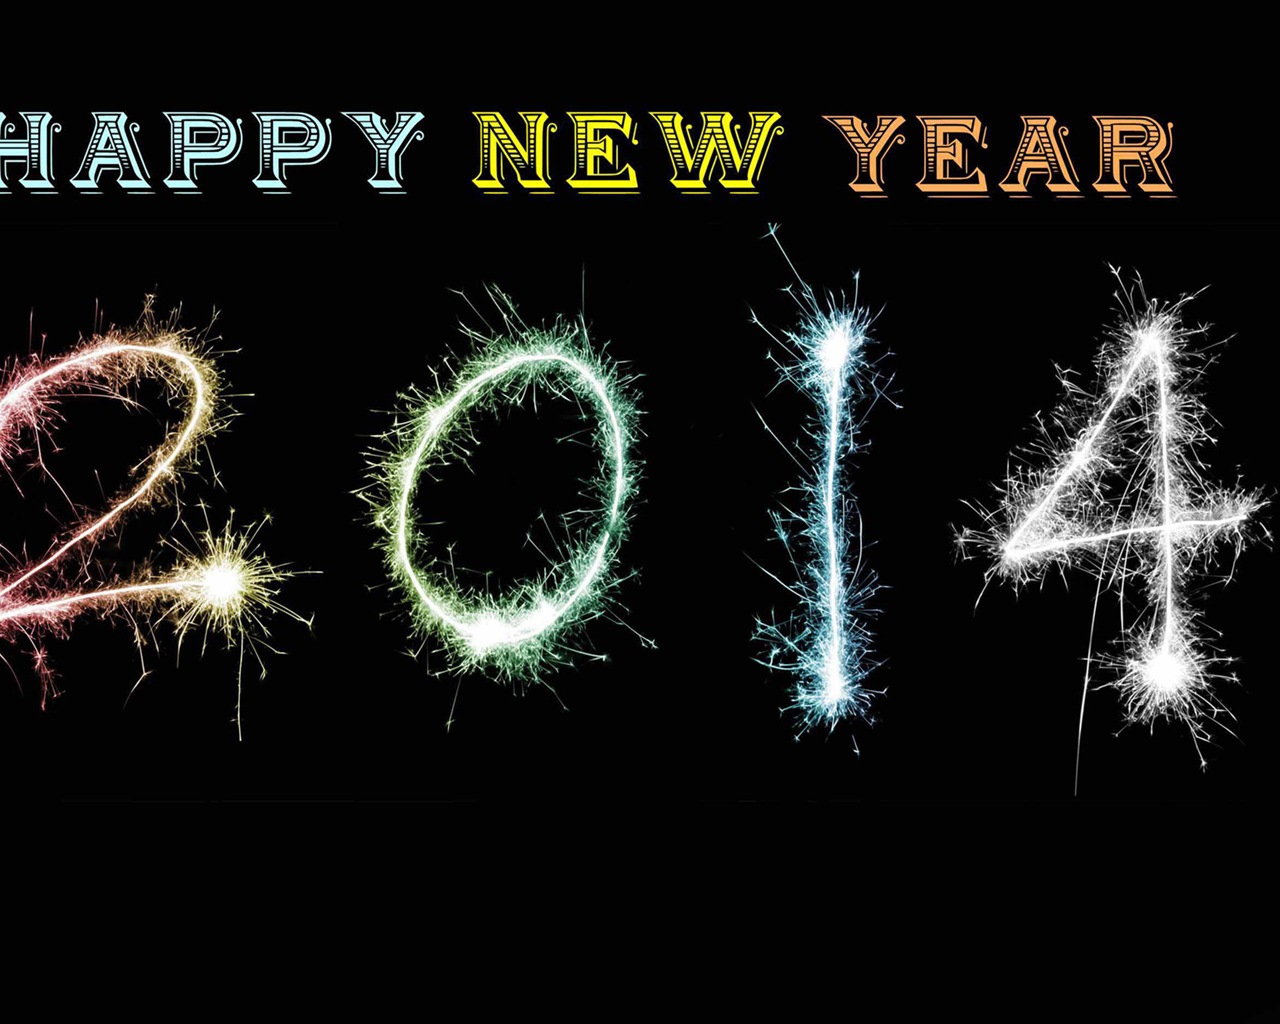 2014 New Year Theme HD Wallpapers (2) #12 - 1280x1024